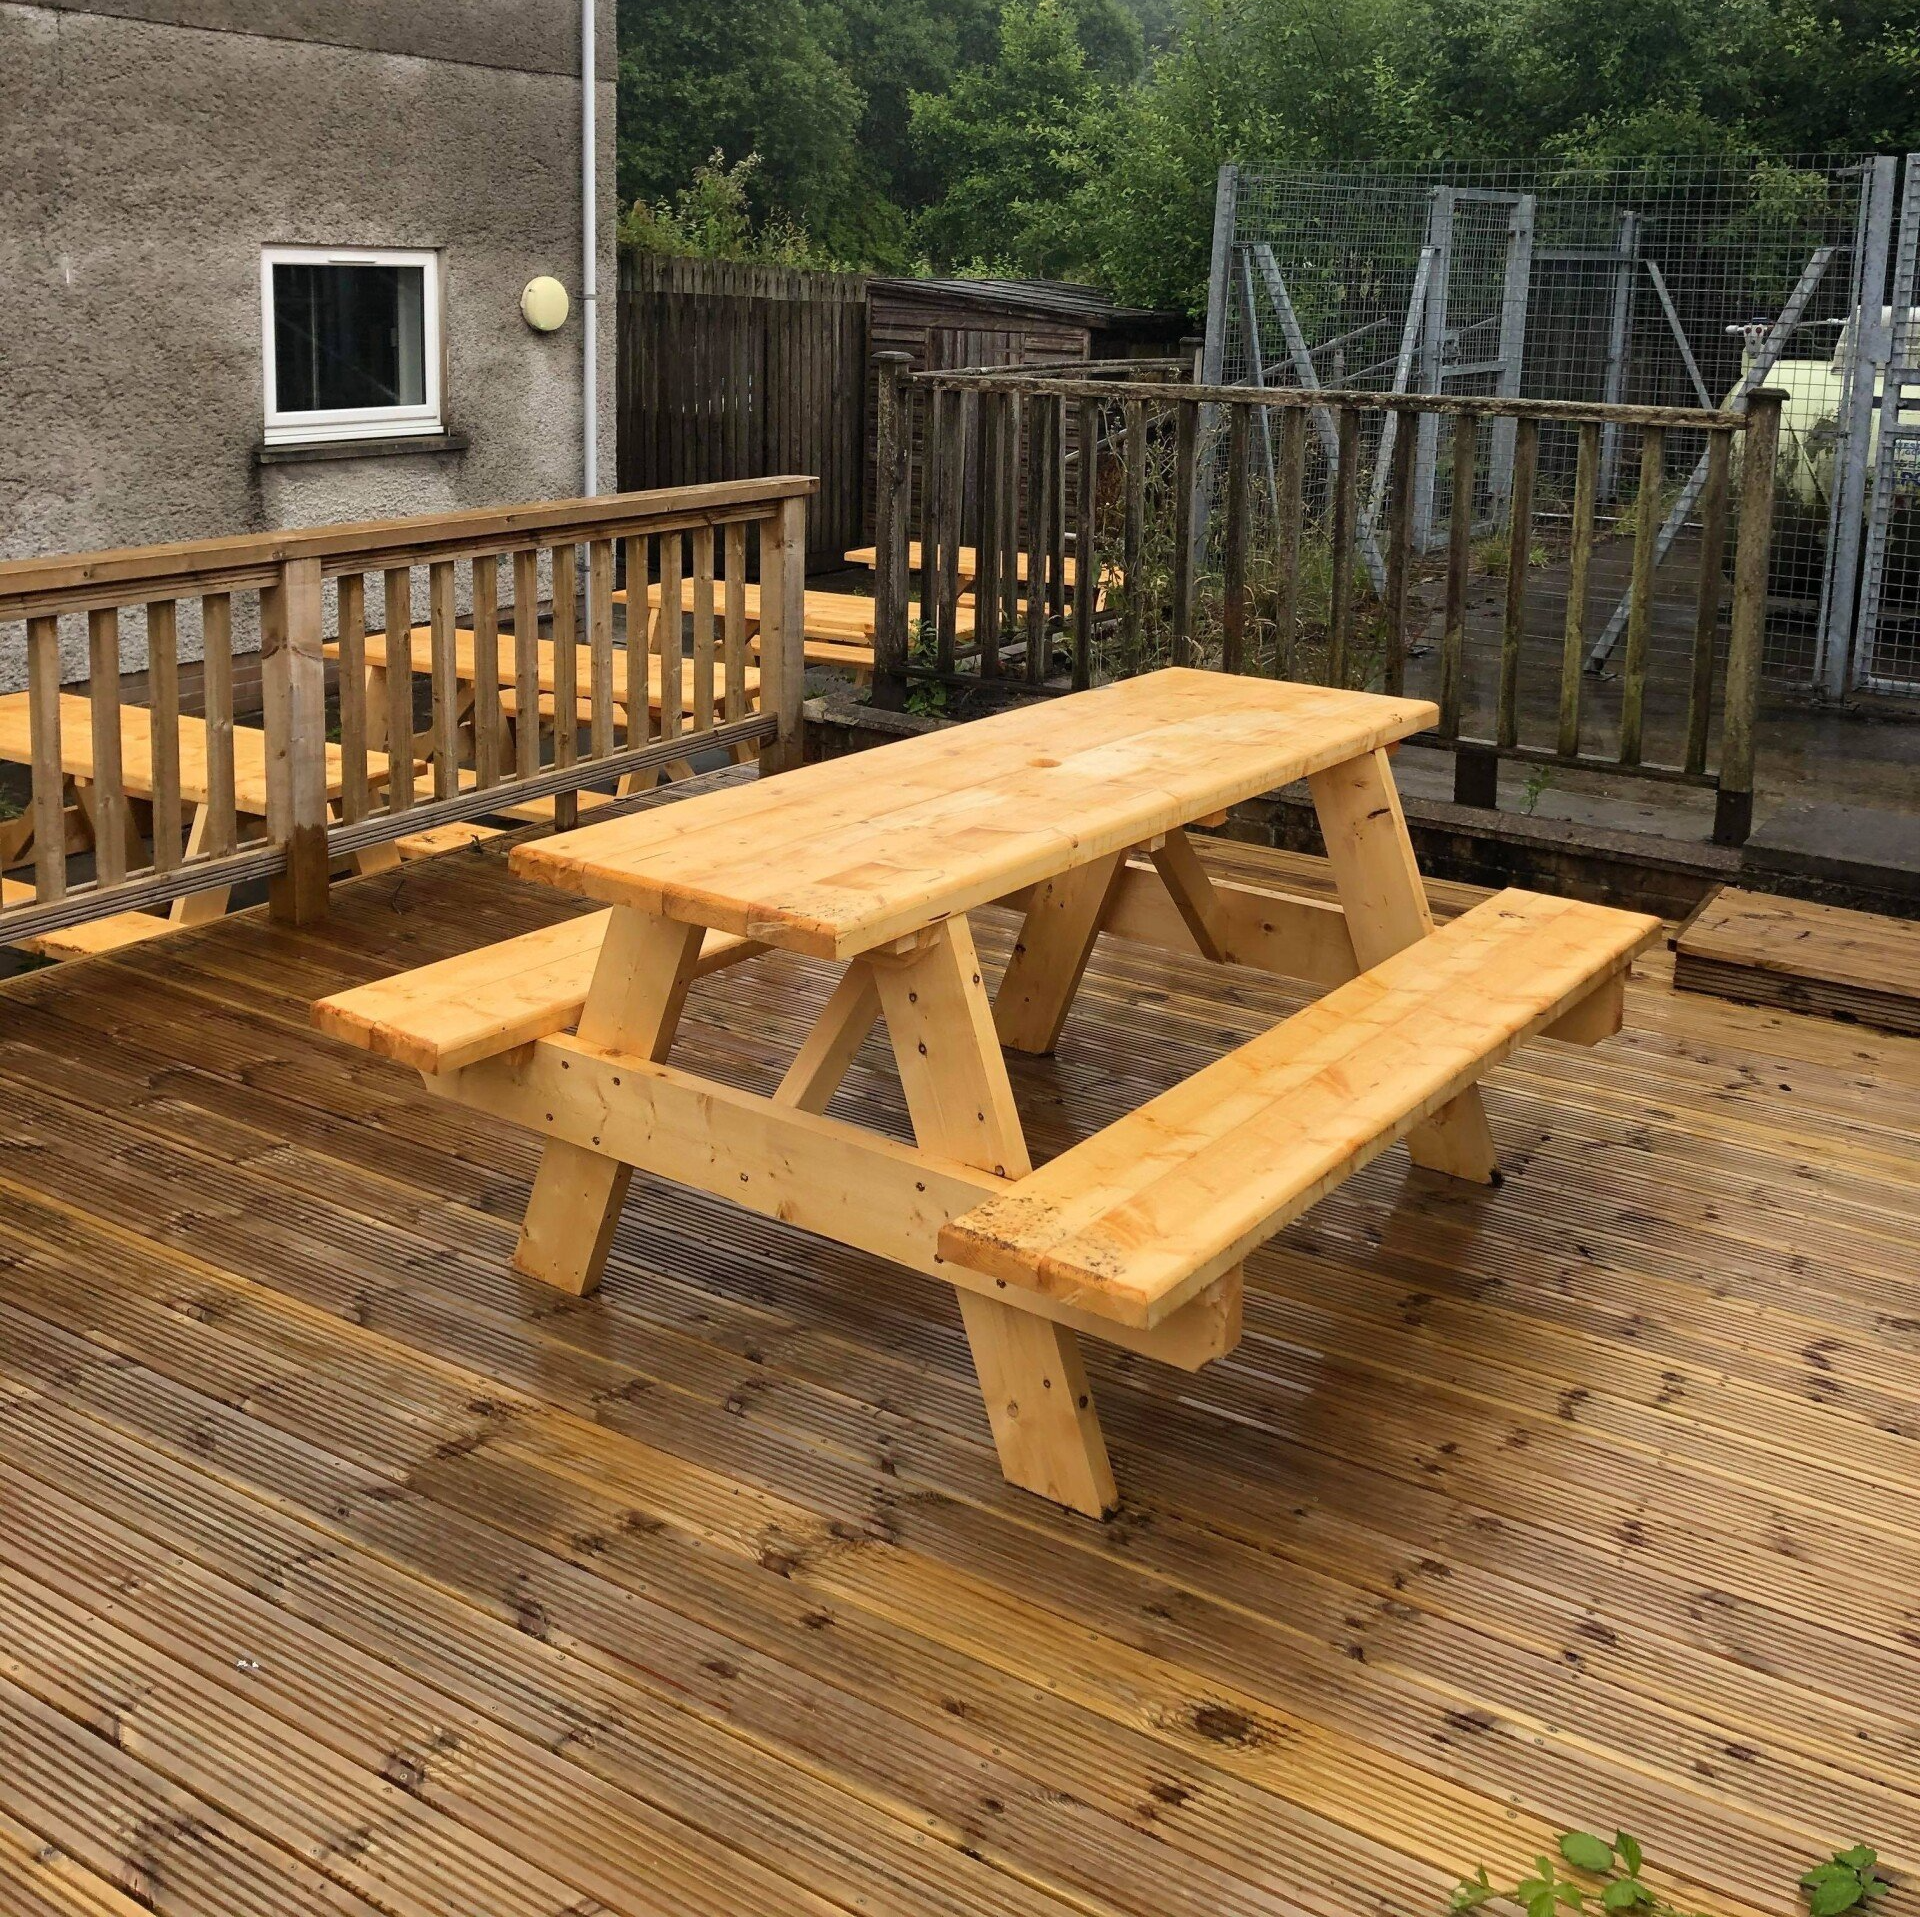 Picnic Benches for Pubs, Gardens available to collect or have delivered across South Wales from Carmarthen to Cardiff and up passed Brecon.